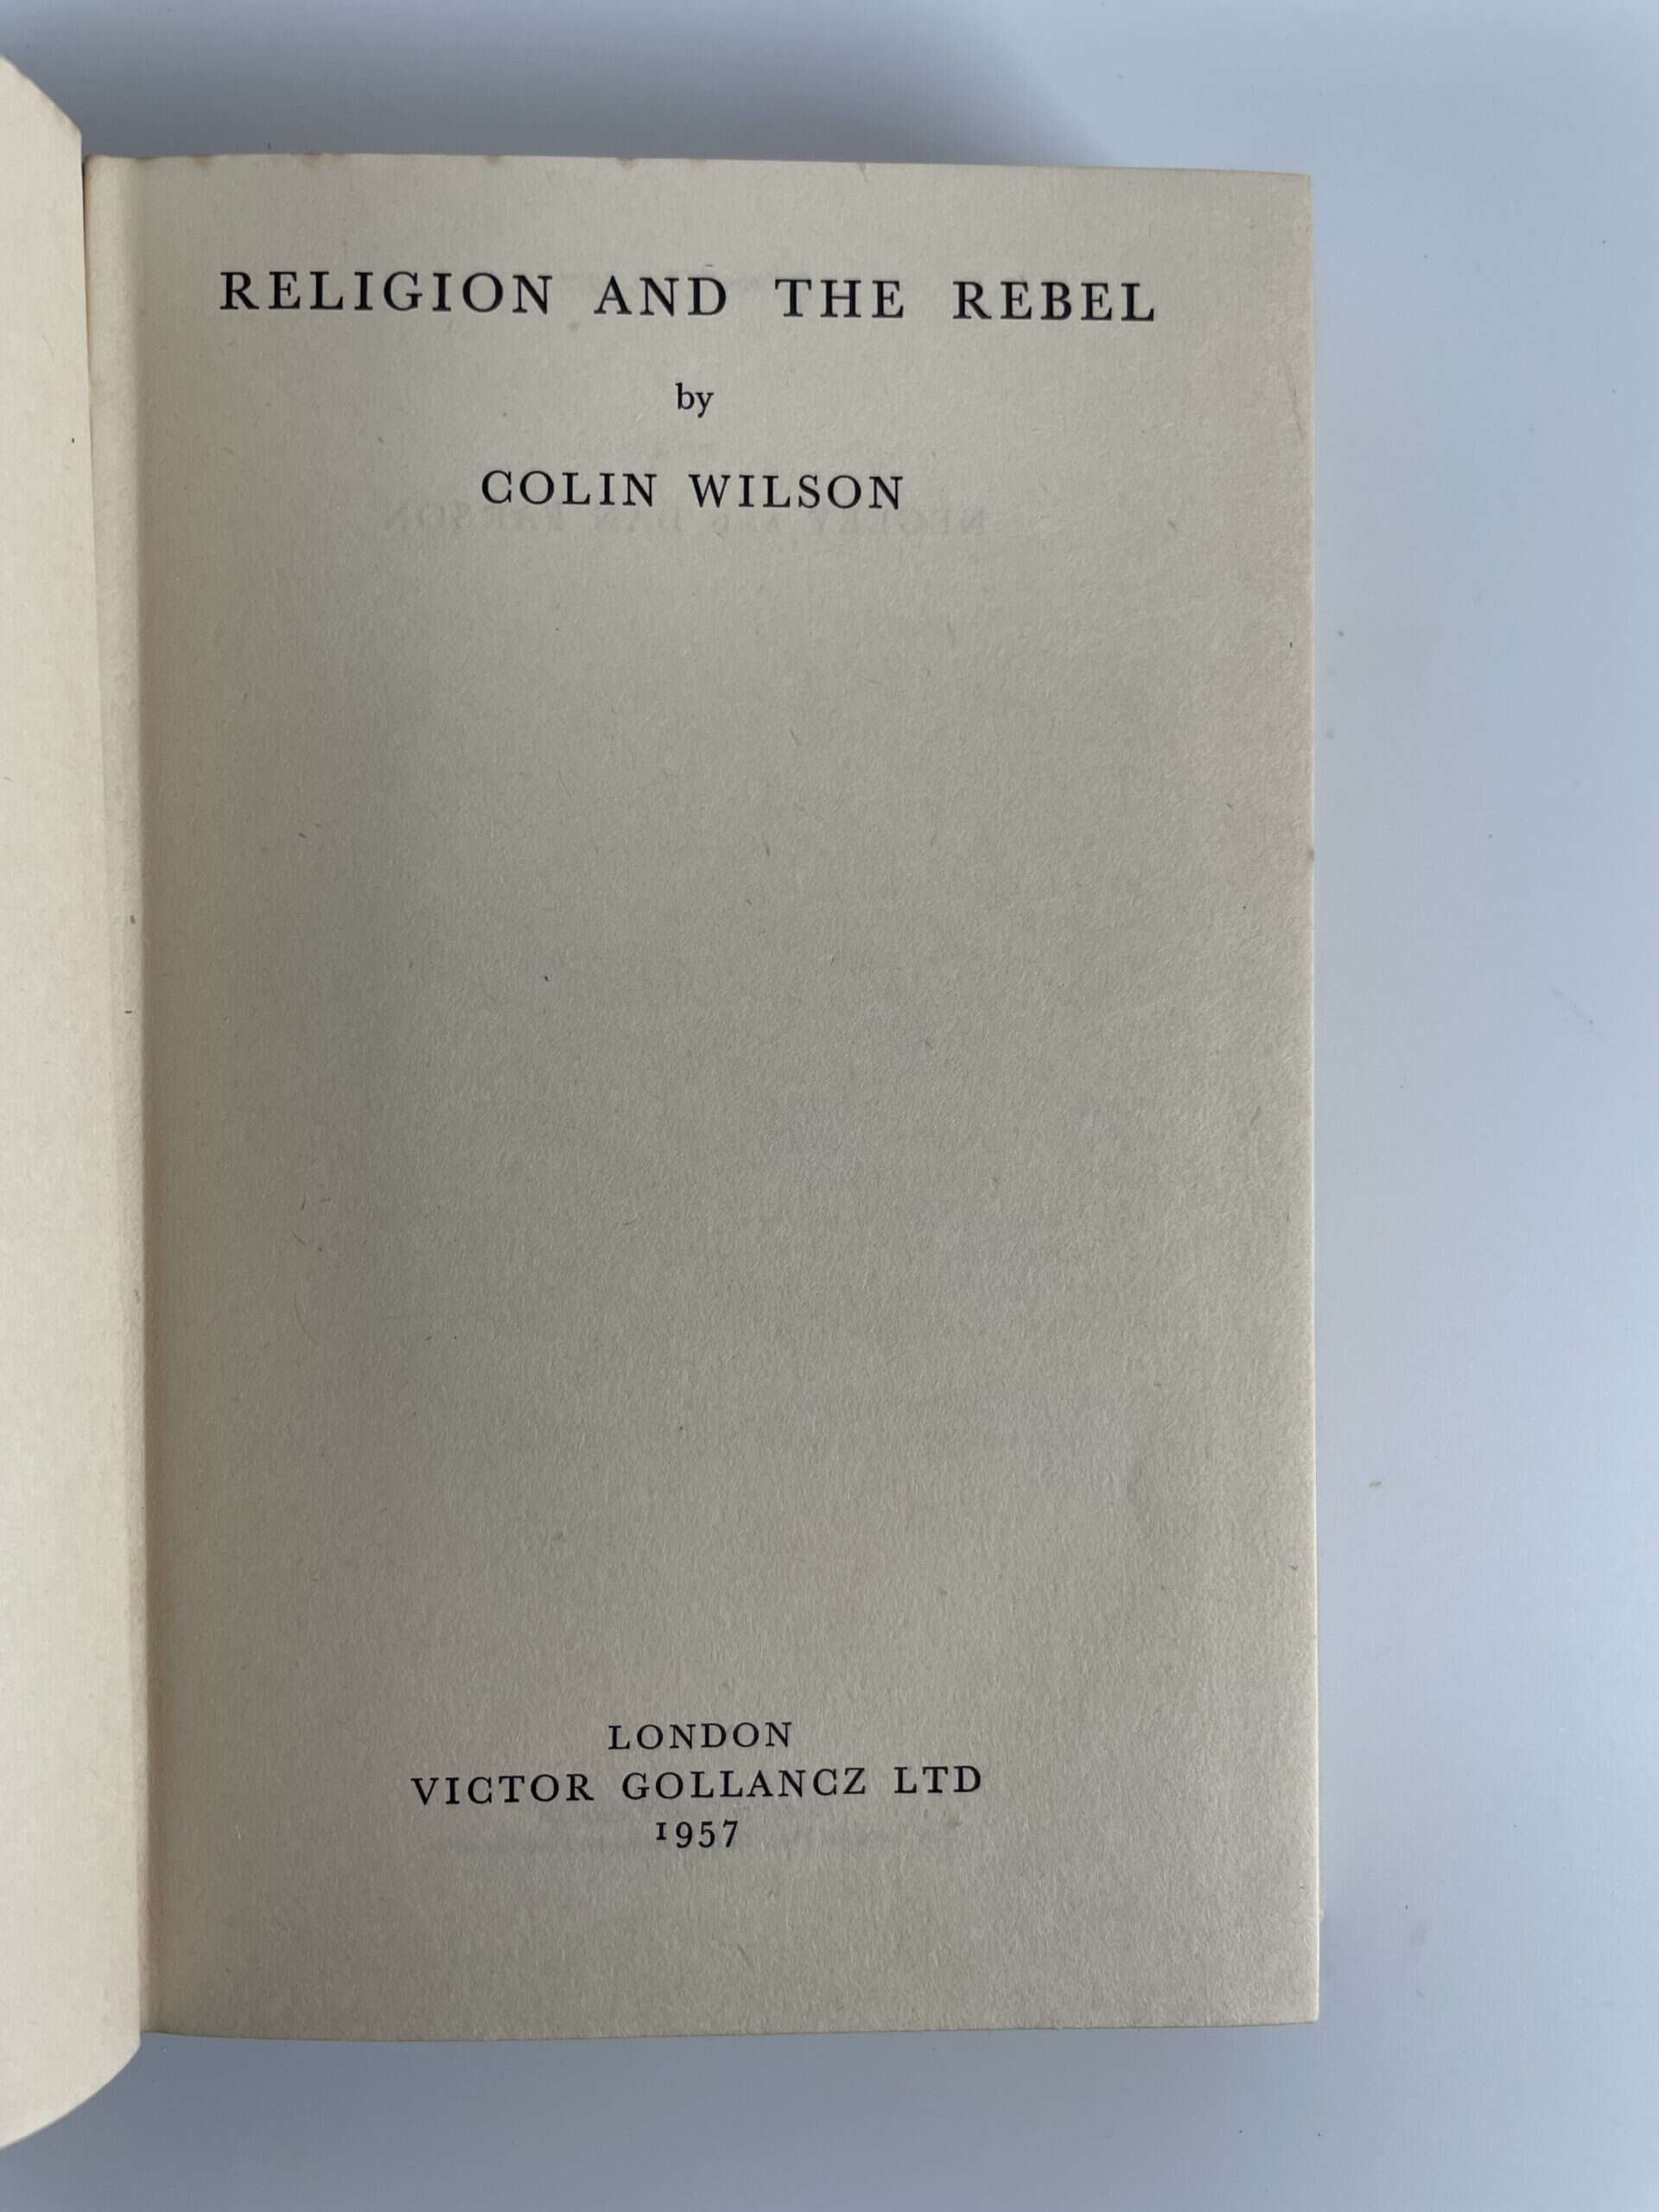 colin wilson religion and the rebel first ed2